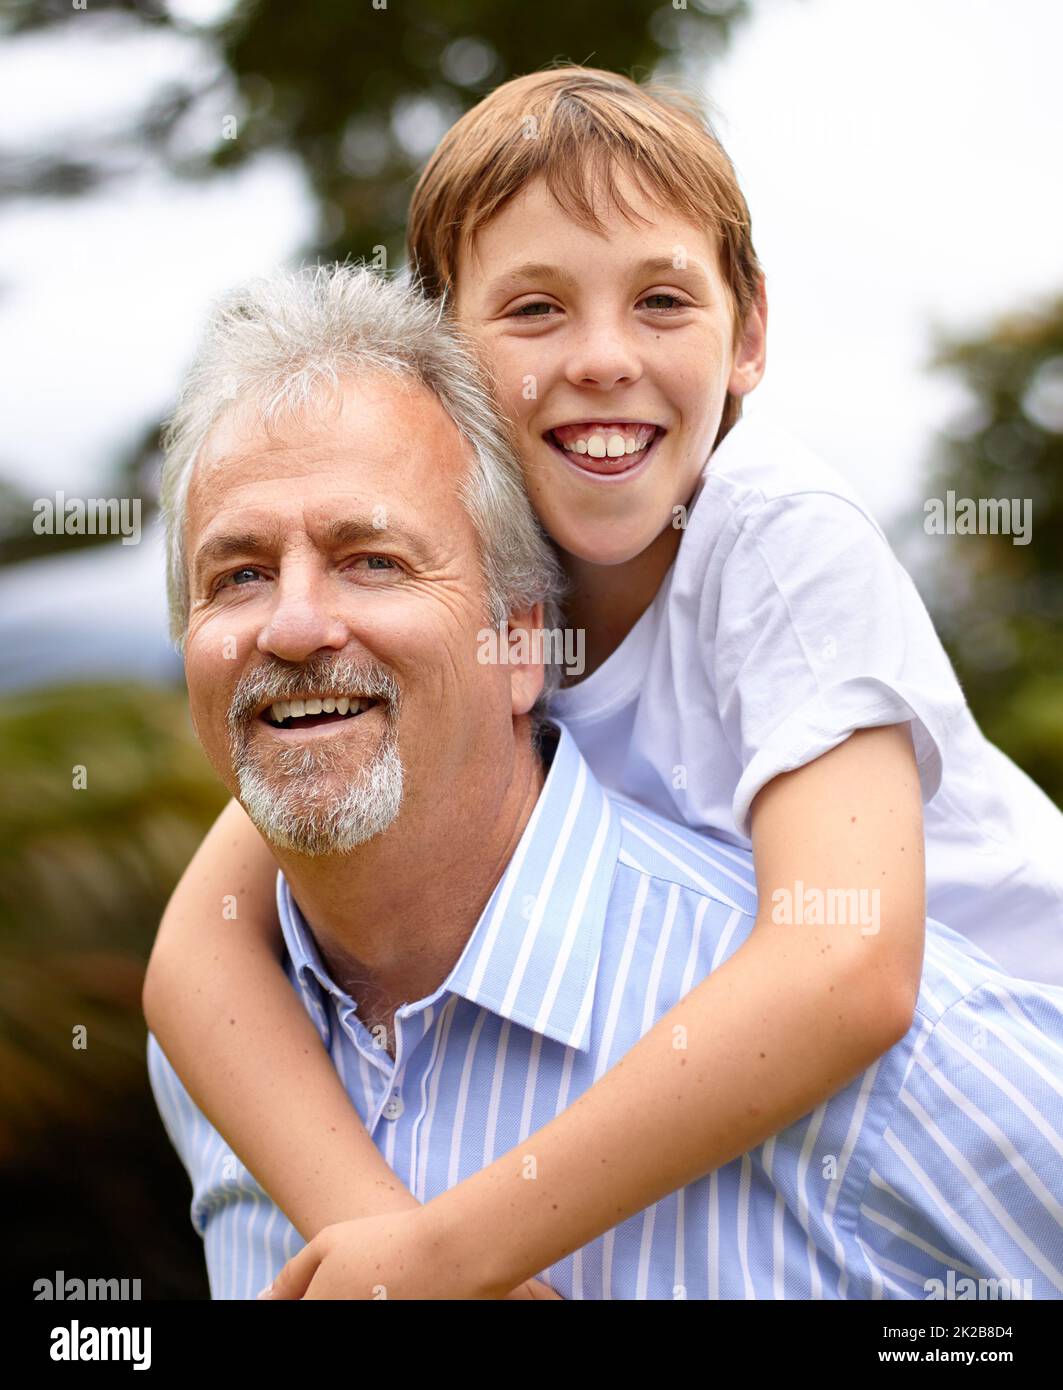 They love spending time together. Shot of a father and son spending time at the park. Stock Photo